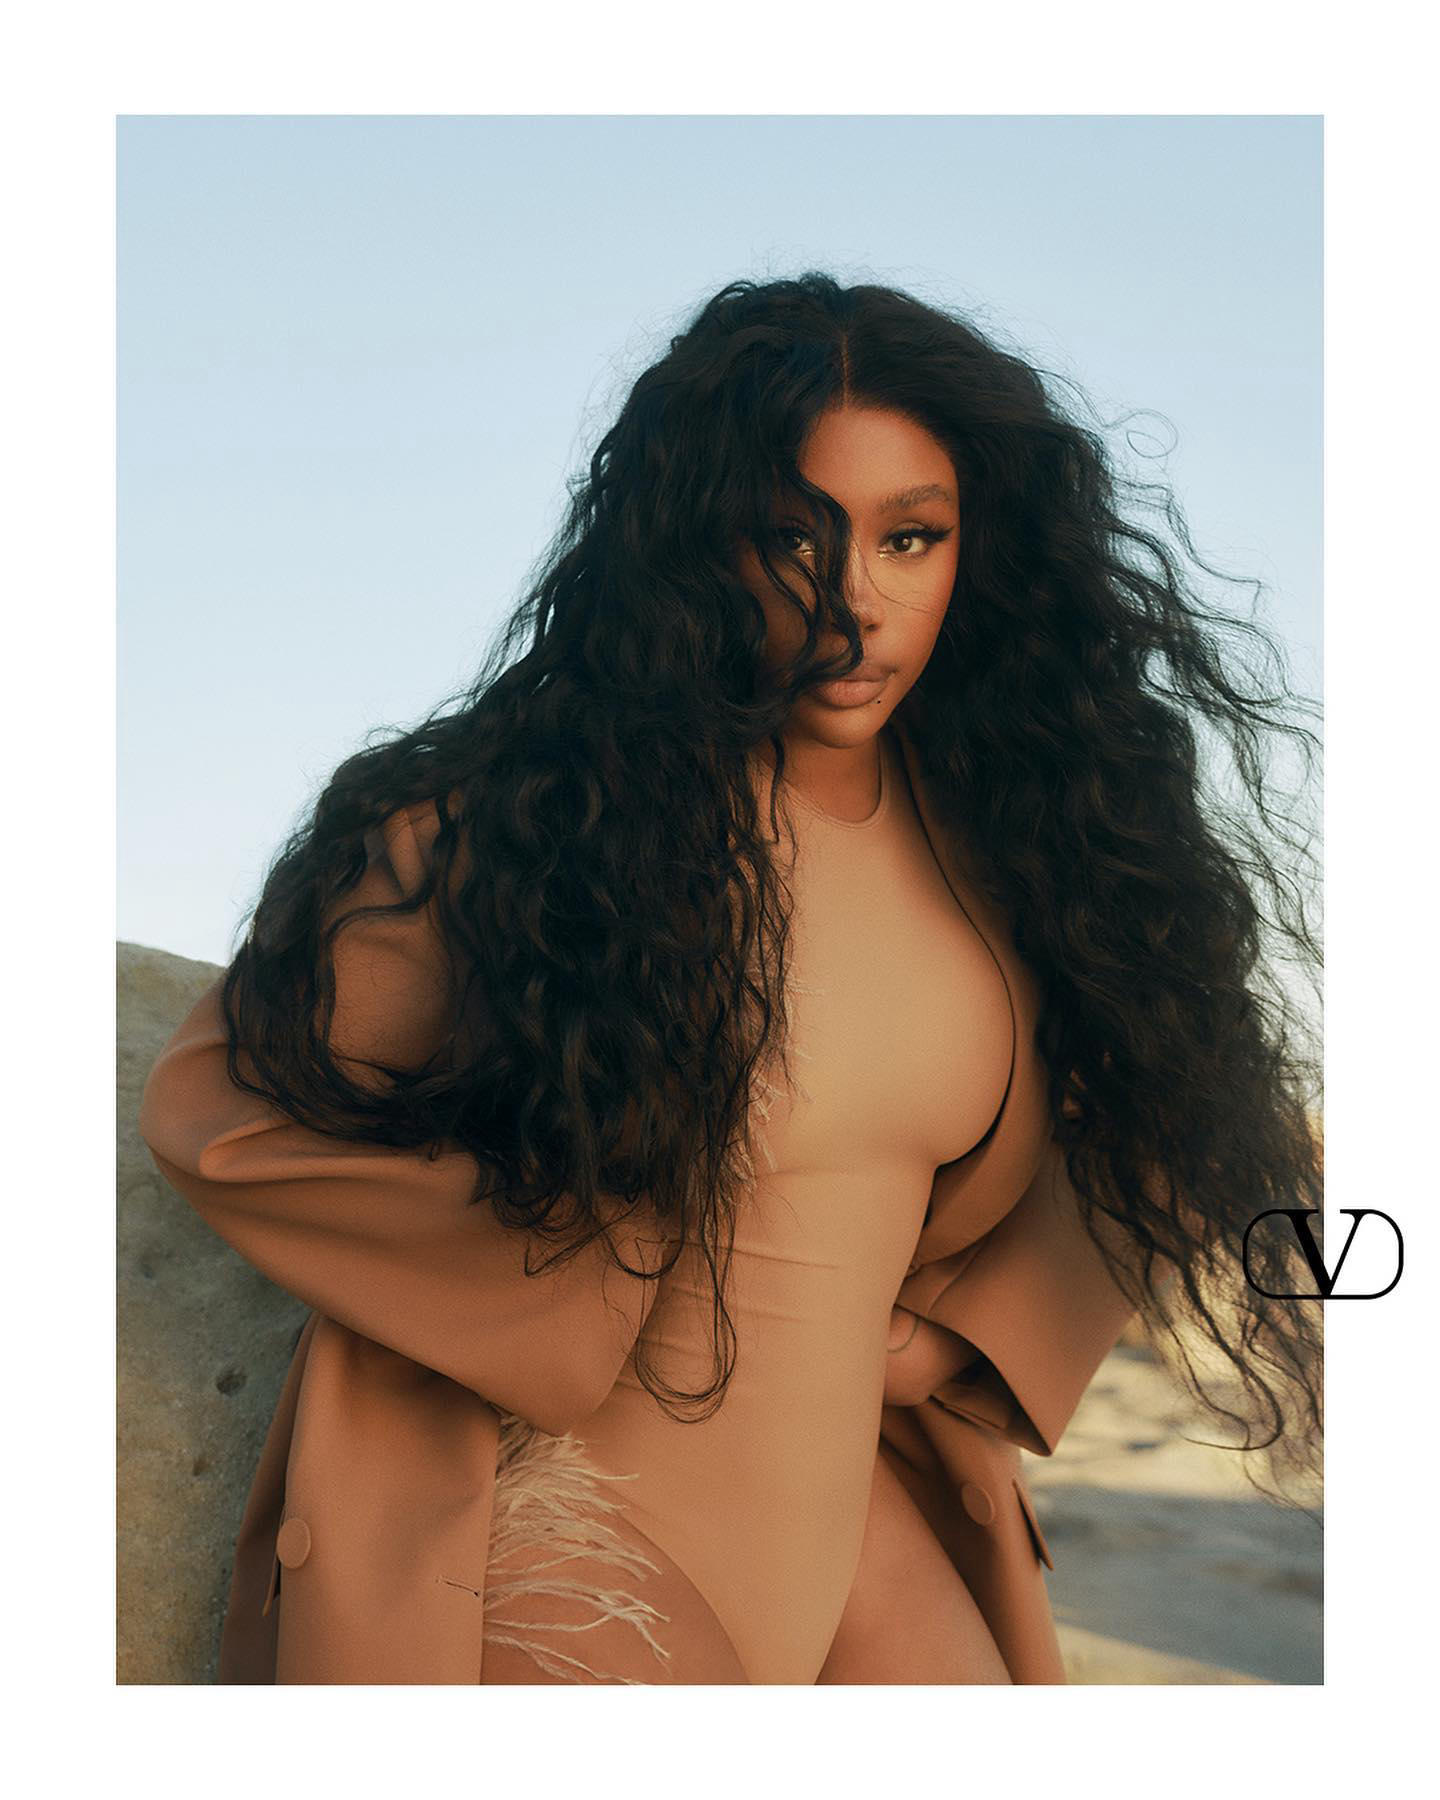 image  1 #sza stars in #UnboxingValentino for #crfashionbook’s “Mother Nature” Issue 22